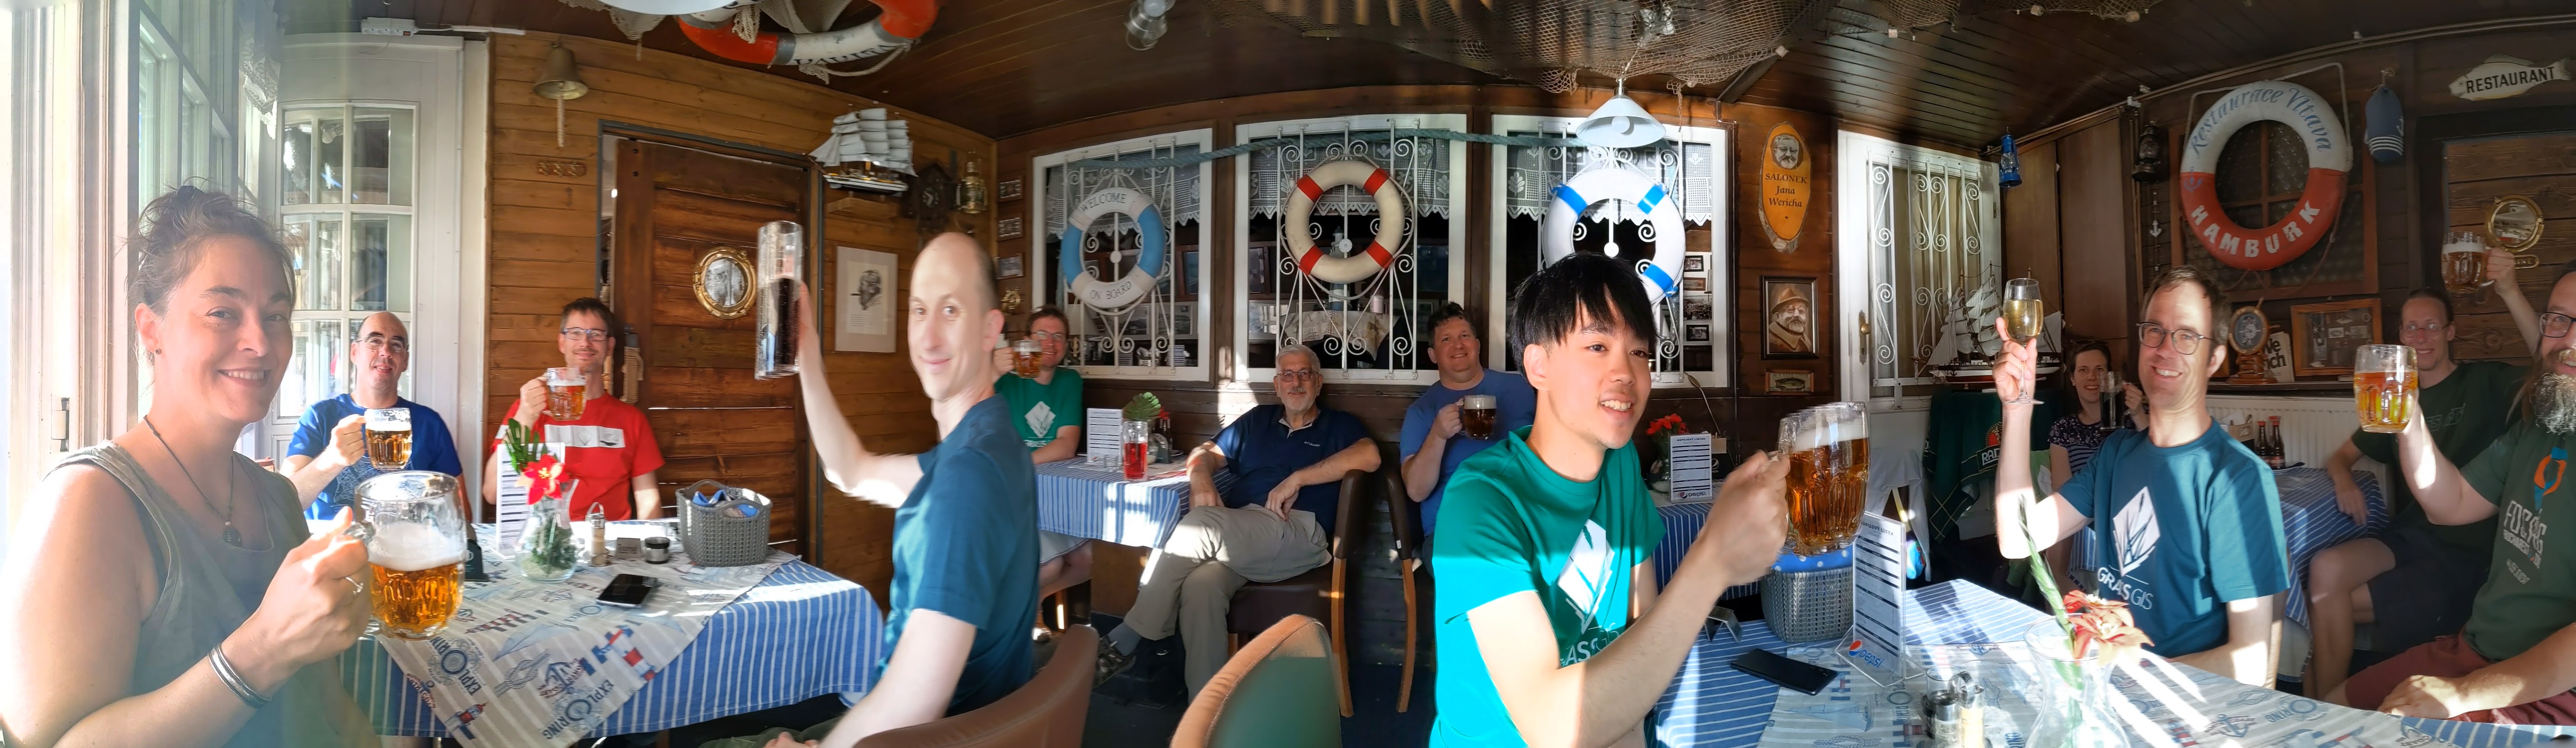 Thumbnail for File:Beer-pano-day3.jpg